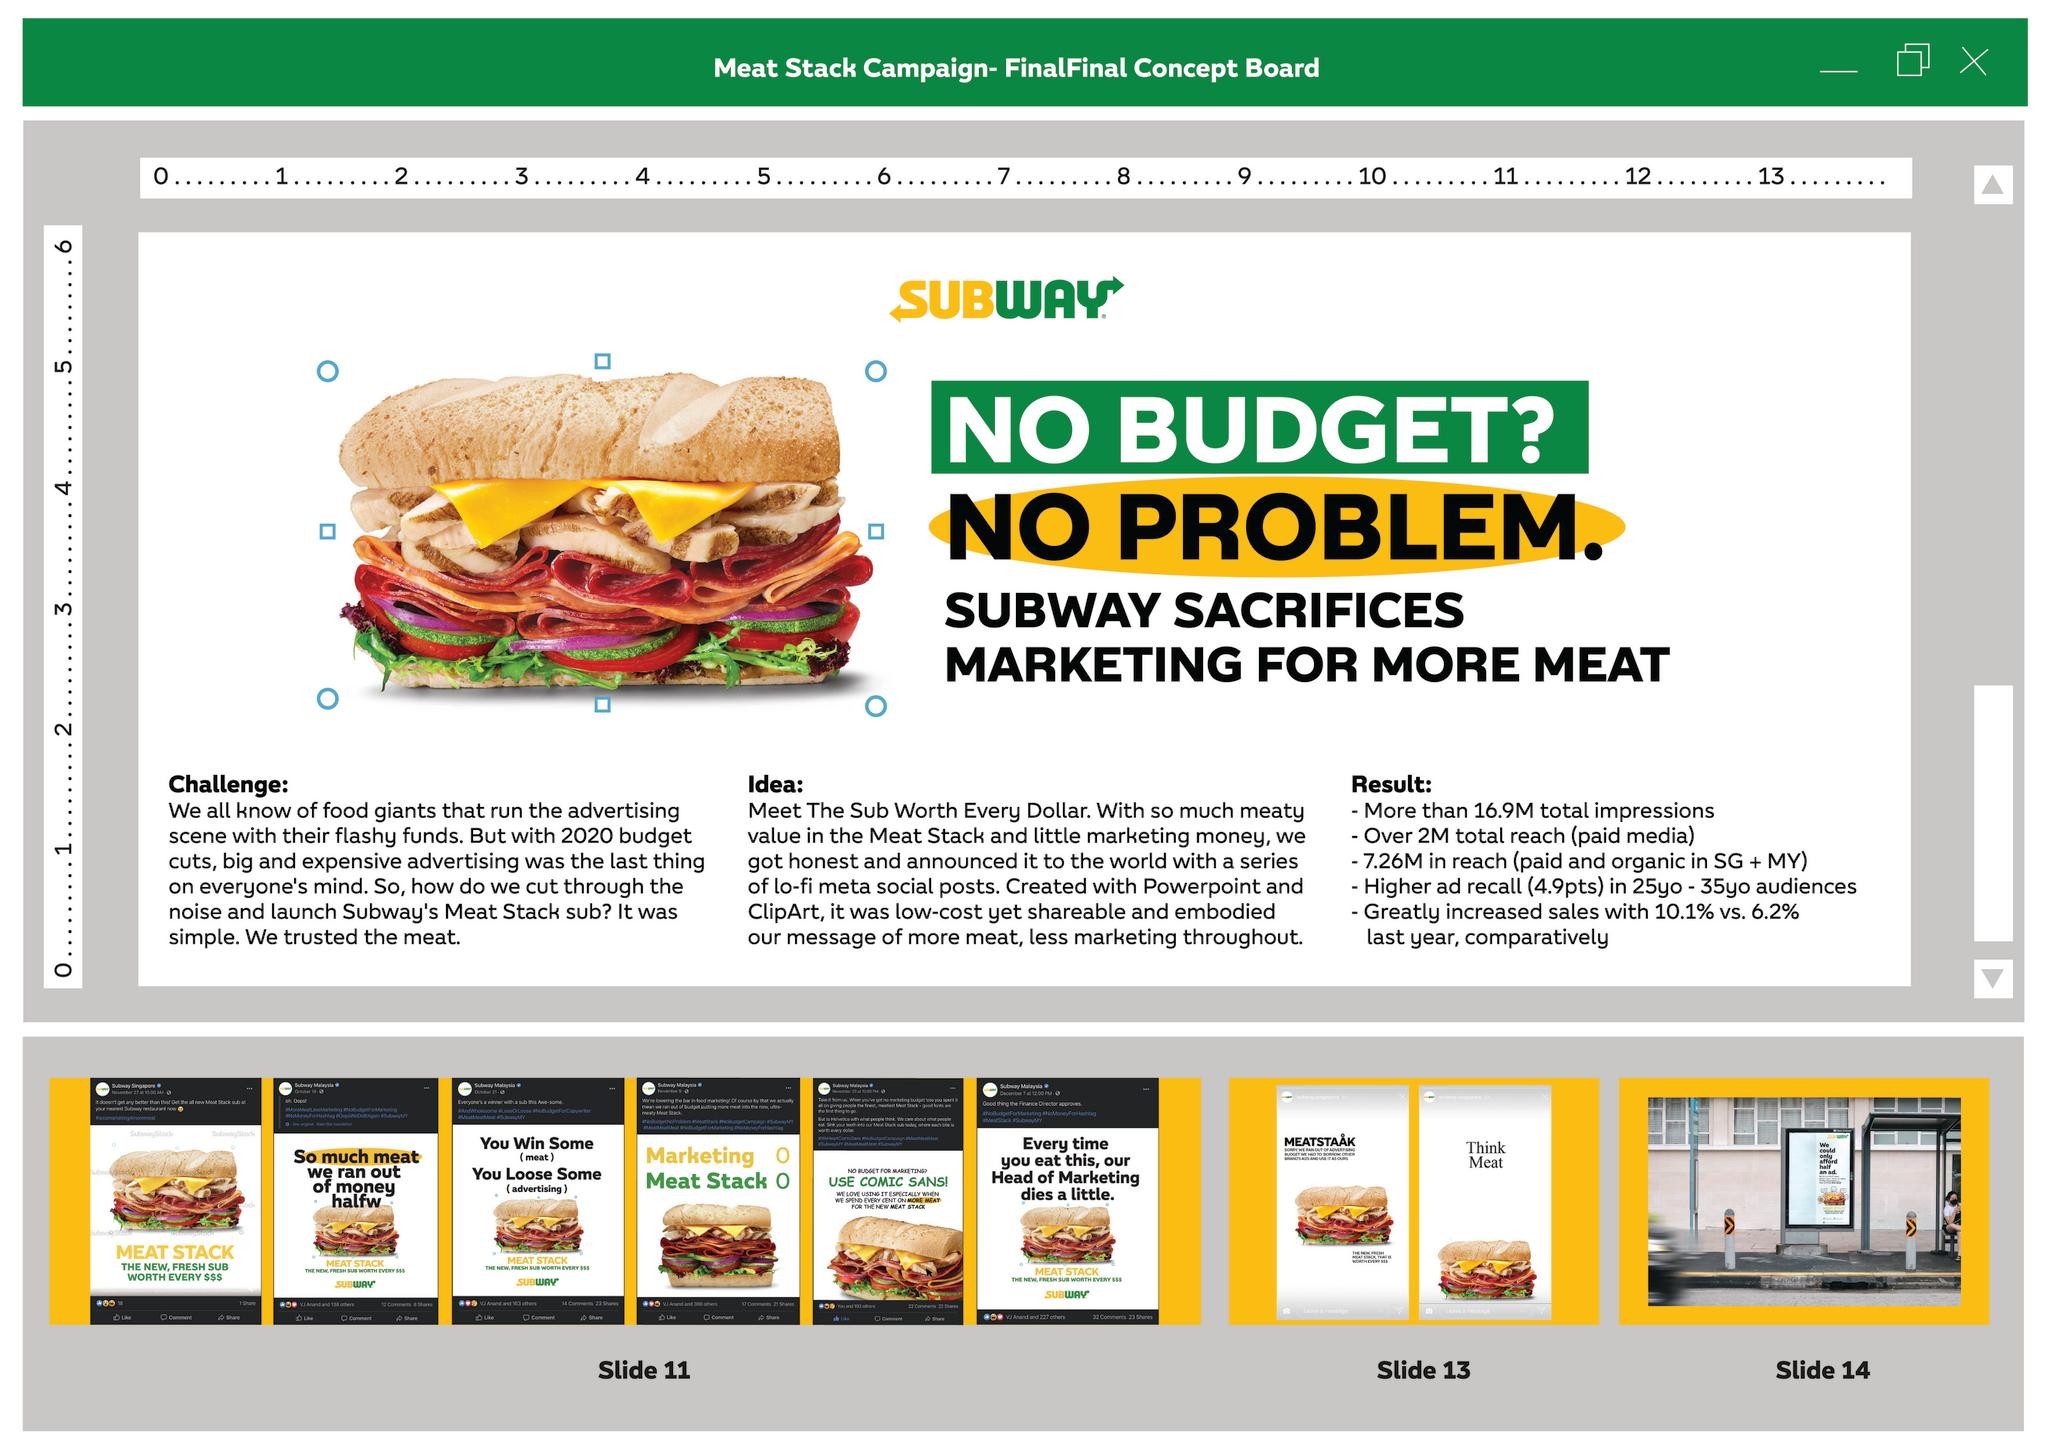 Subway : Less Marketing, More Meat.